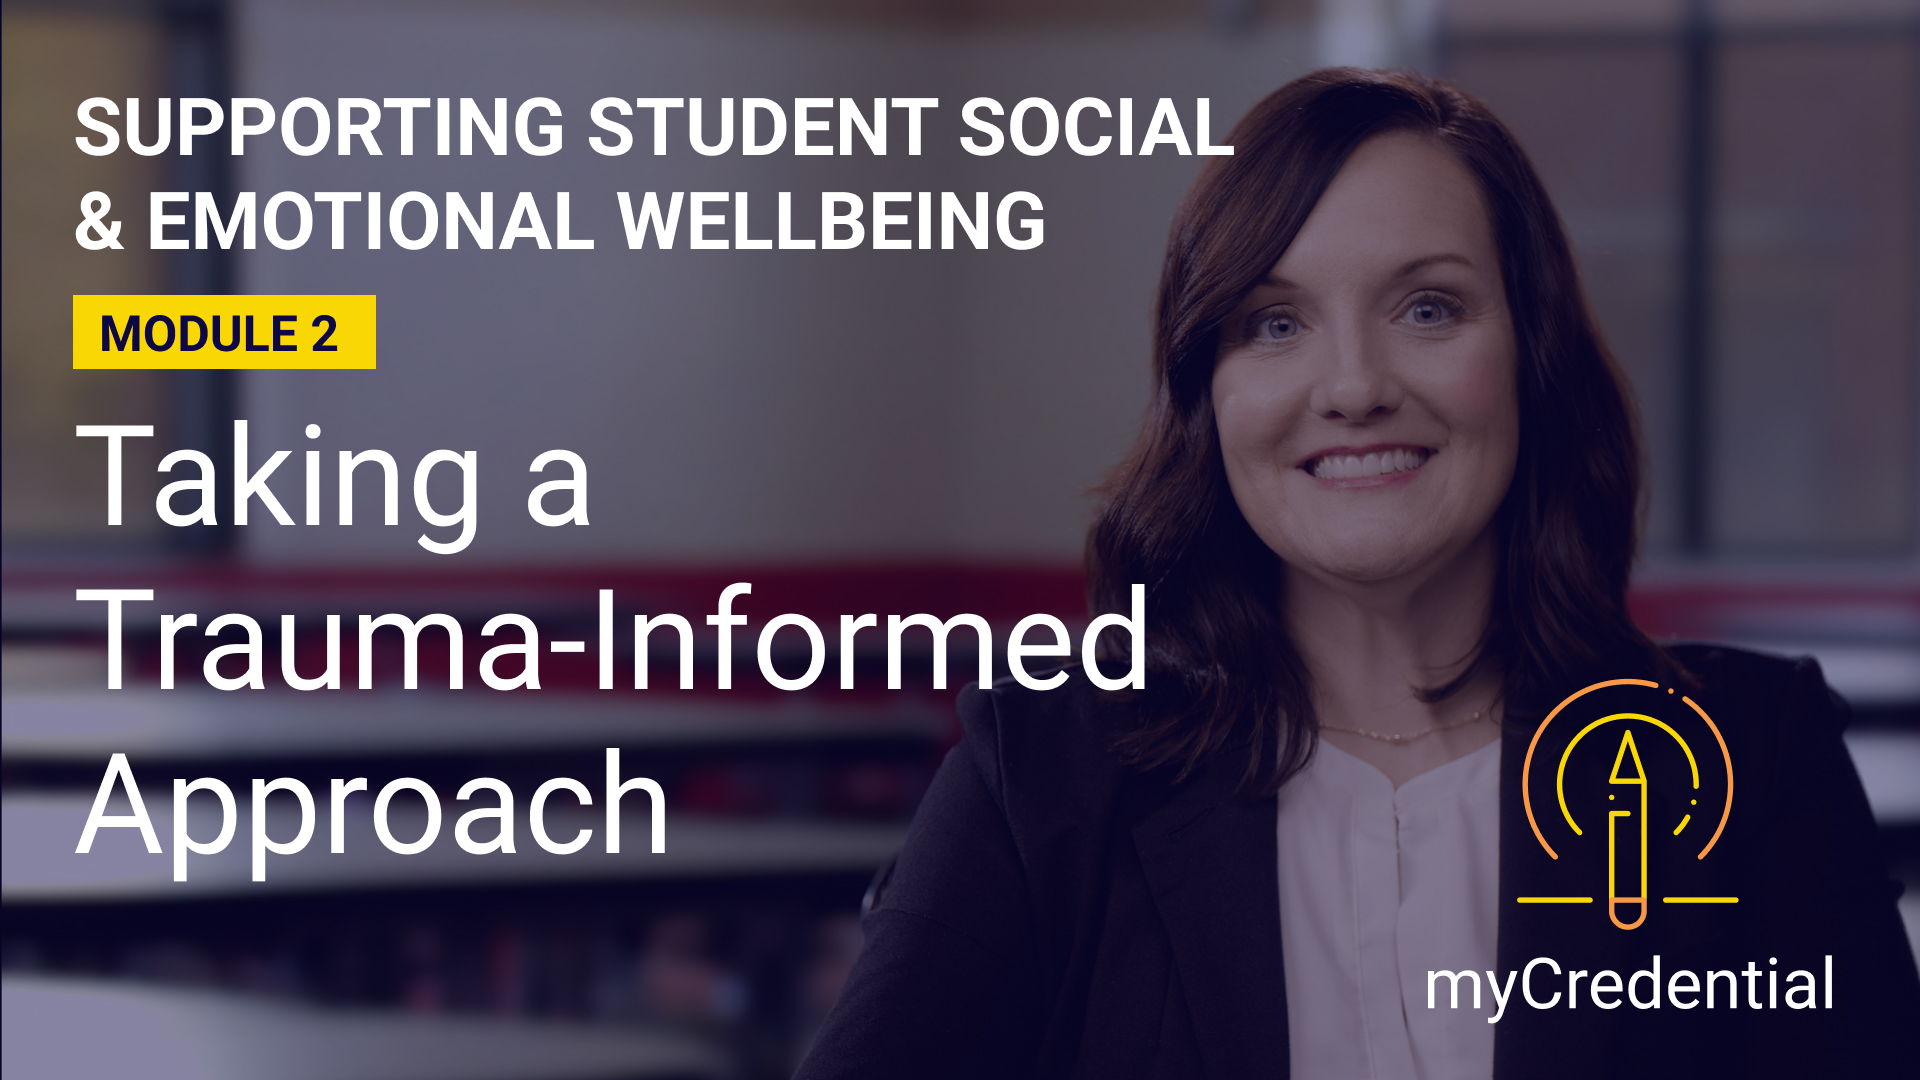 Supporting Student Social & Emotional Wellbeing (Module 2): Taking a Trauma-Informed Approach